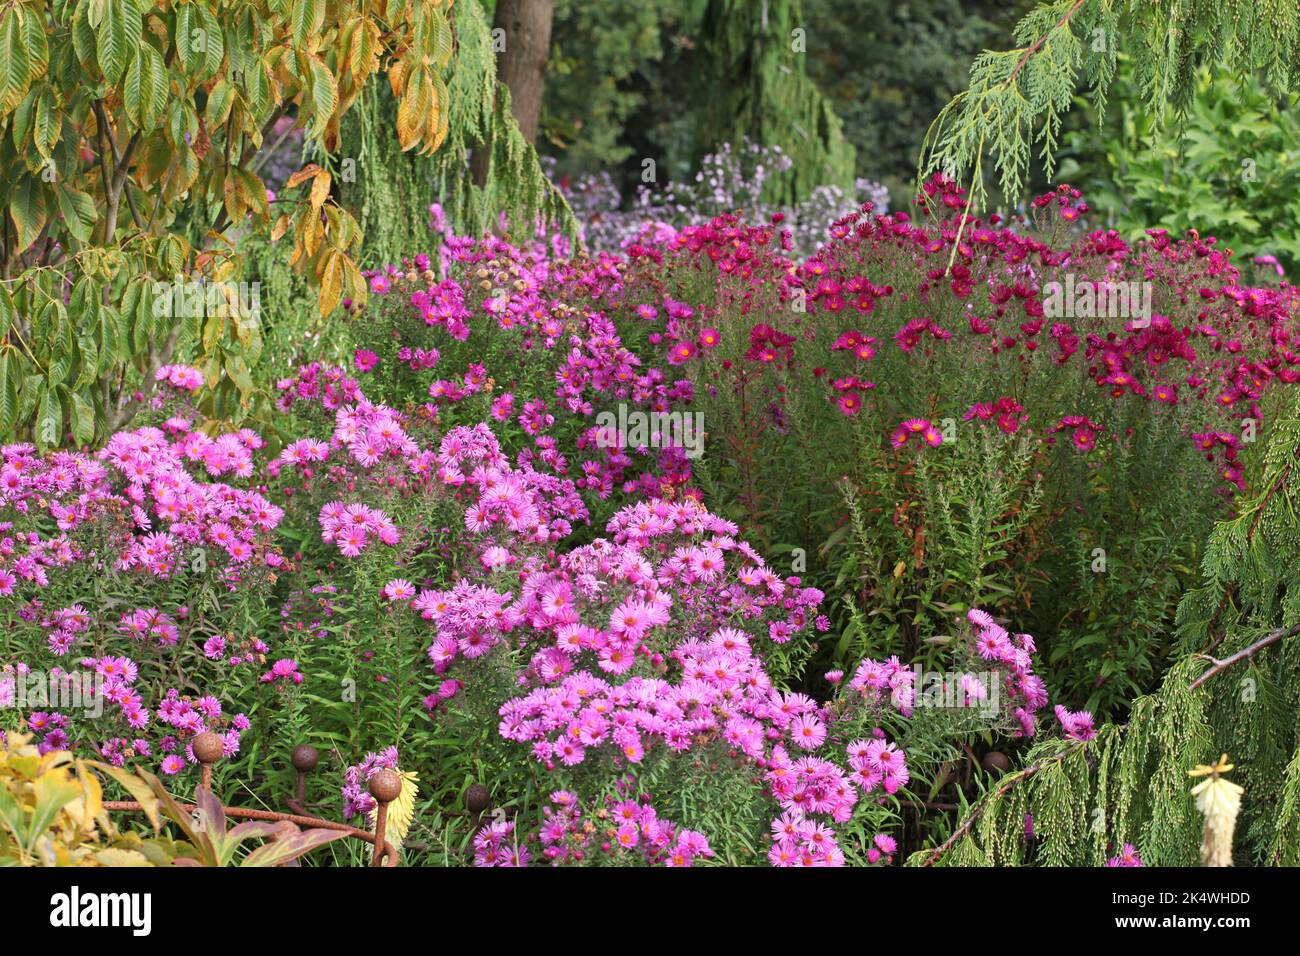 Colourful New Eland asters in flower Stock Photo